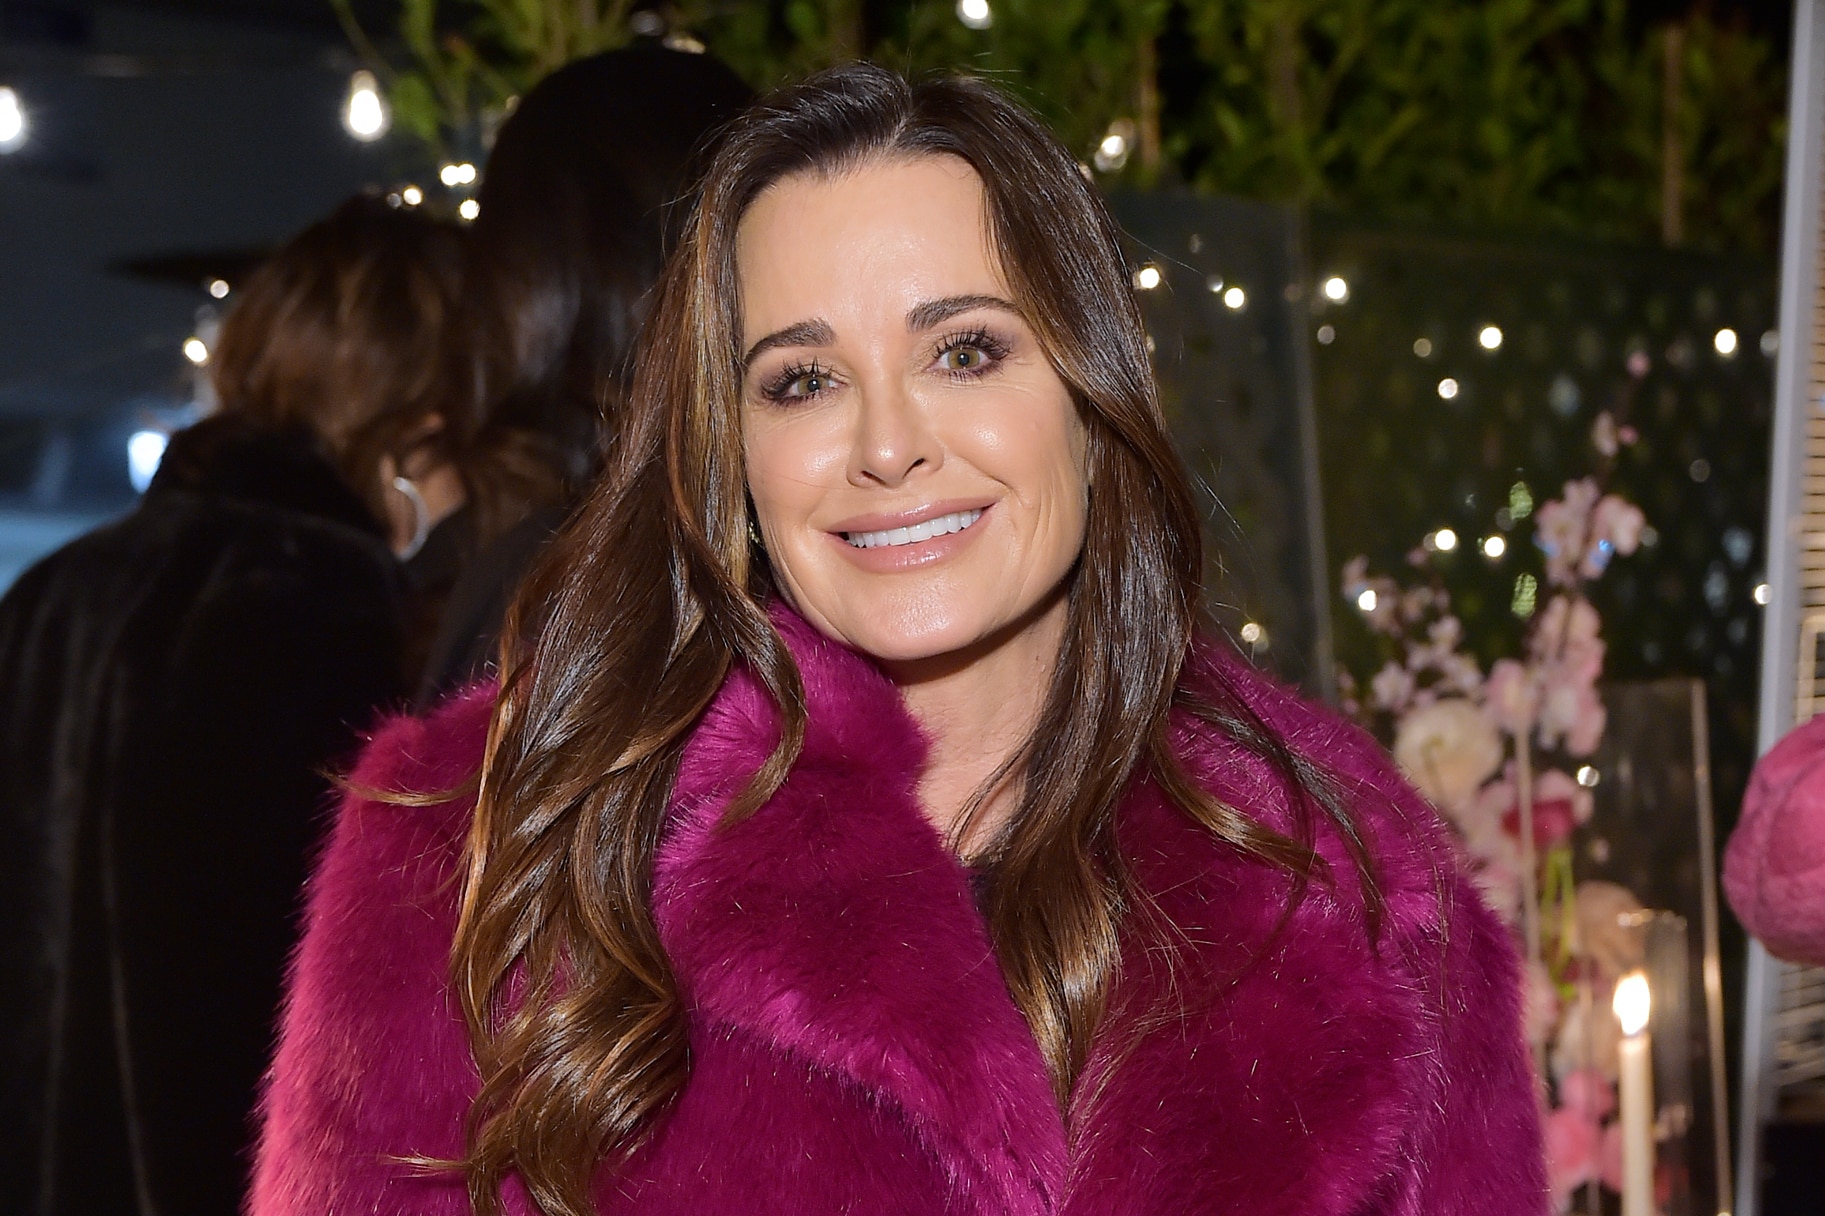 Halloween Ends': Kyle Richards Set to Return as Lindsey Wallace